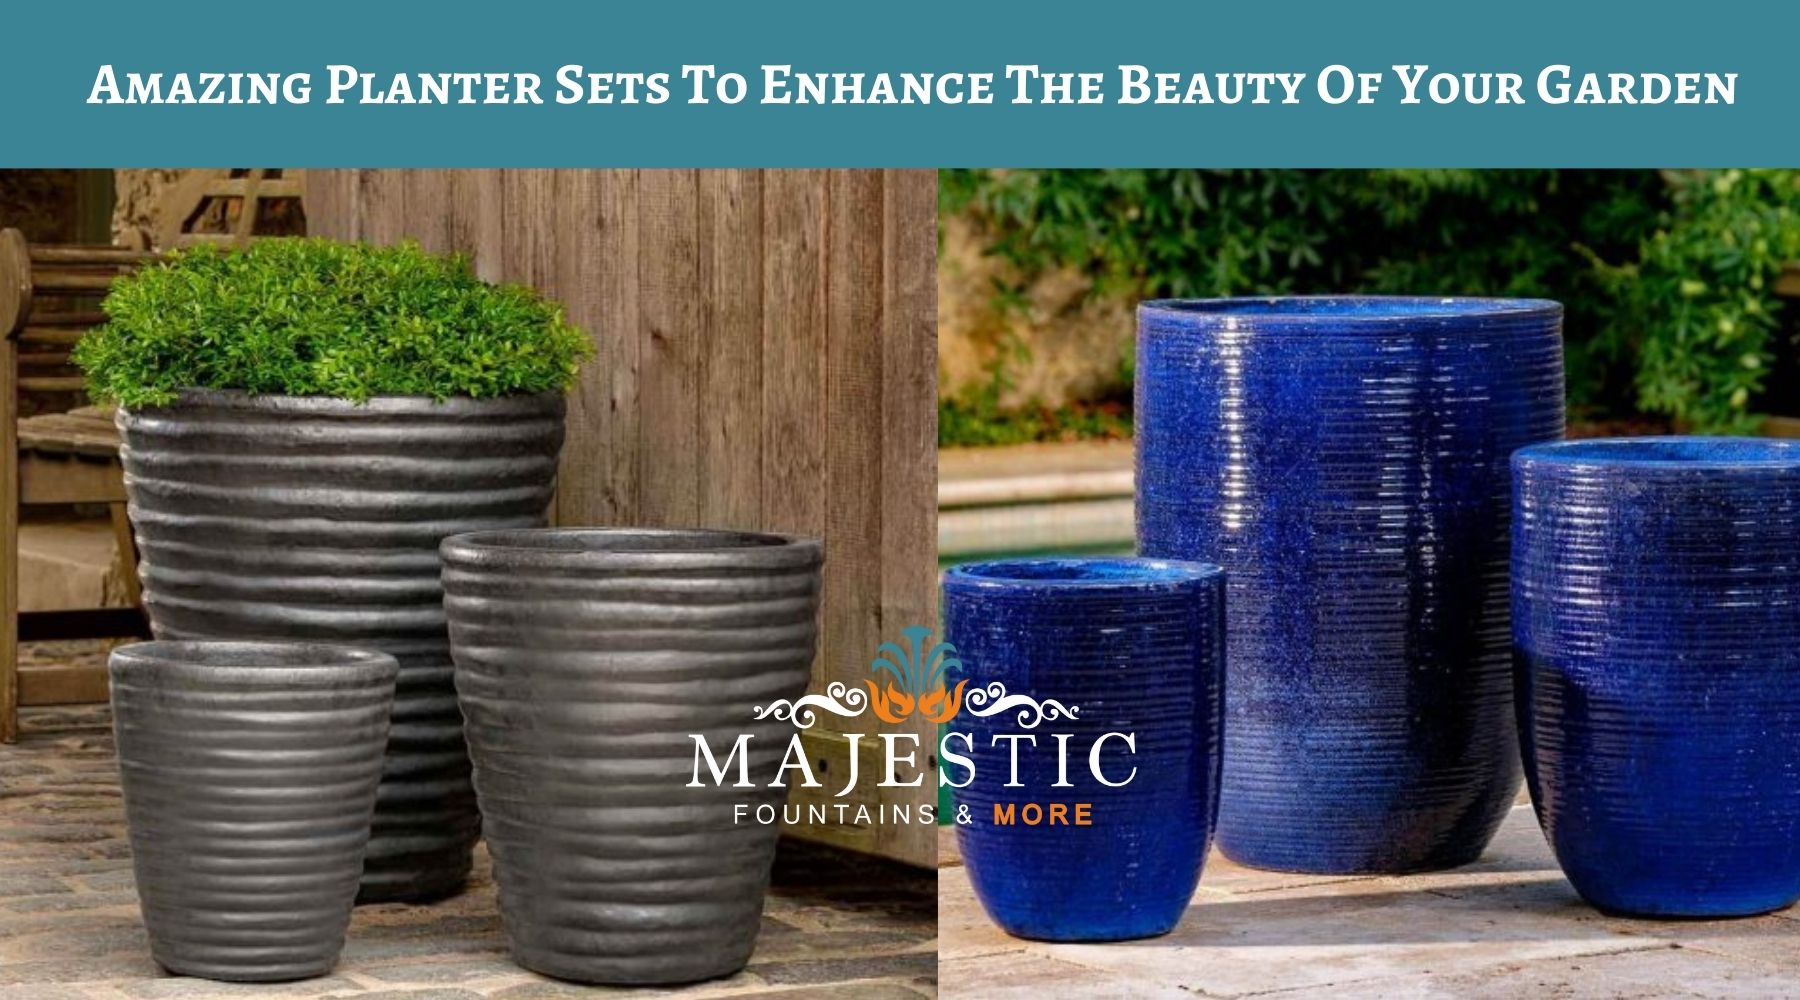 7 Amazing Planter Sets To Enhance The Beauty Of Your Garden